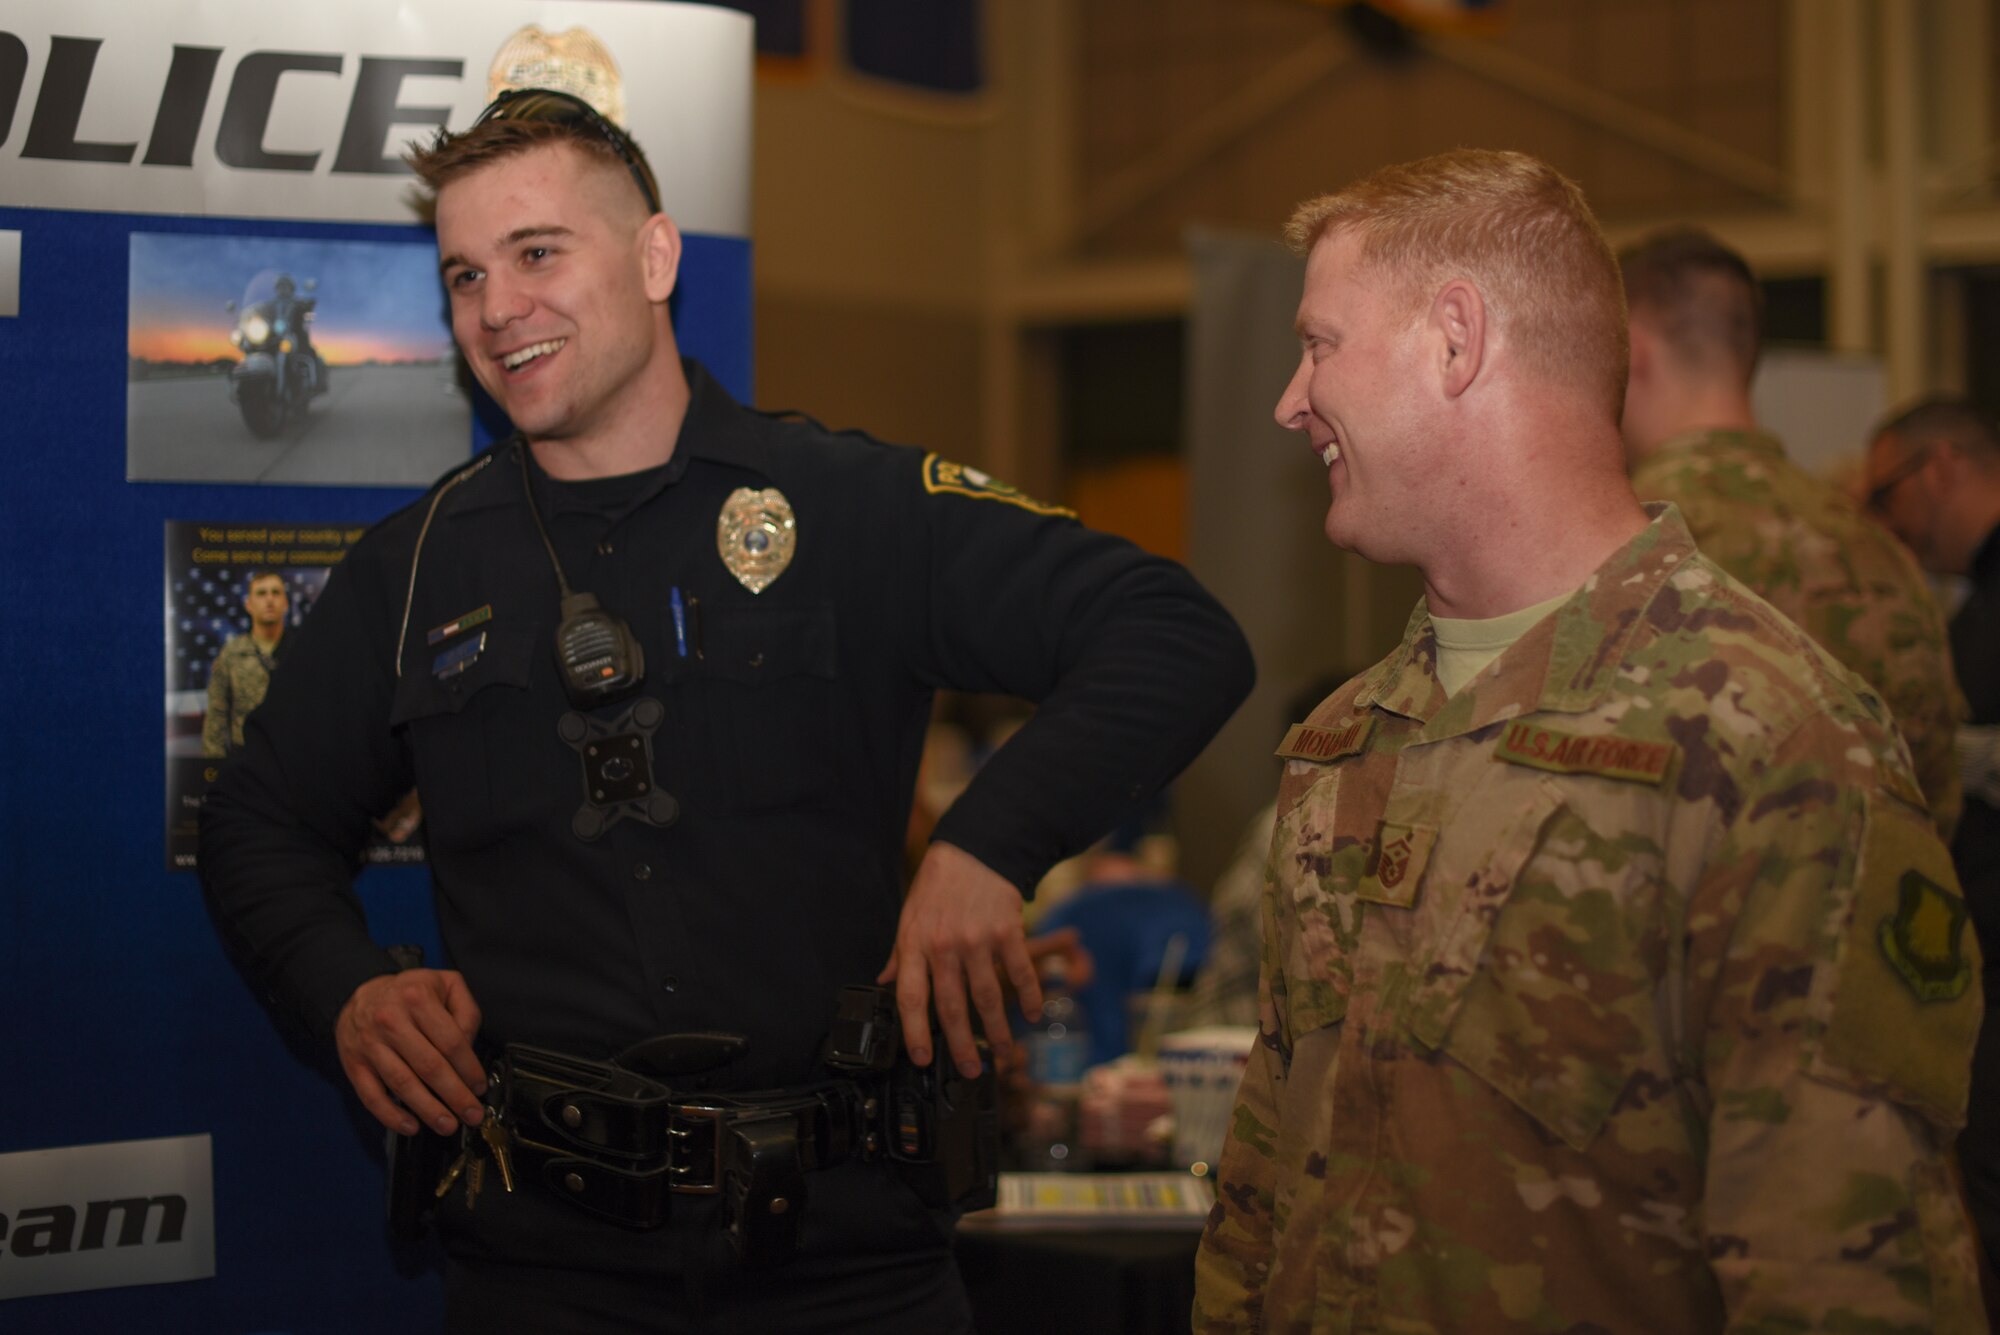 Master Sgt. Jason Monaghan, 22nd Wing Staff Agency first sergeant, discusses employment opportunities with the Salina police officers March 20, 2019 at McConnell Air Force Base, Kan. The job fair hosted 70 employers in the Dole Community Center Ballroom. (U.S. Air Force photo by Airman 1st Class Alexi Myrick)